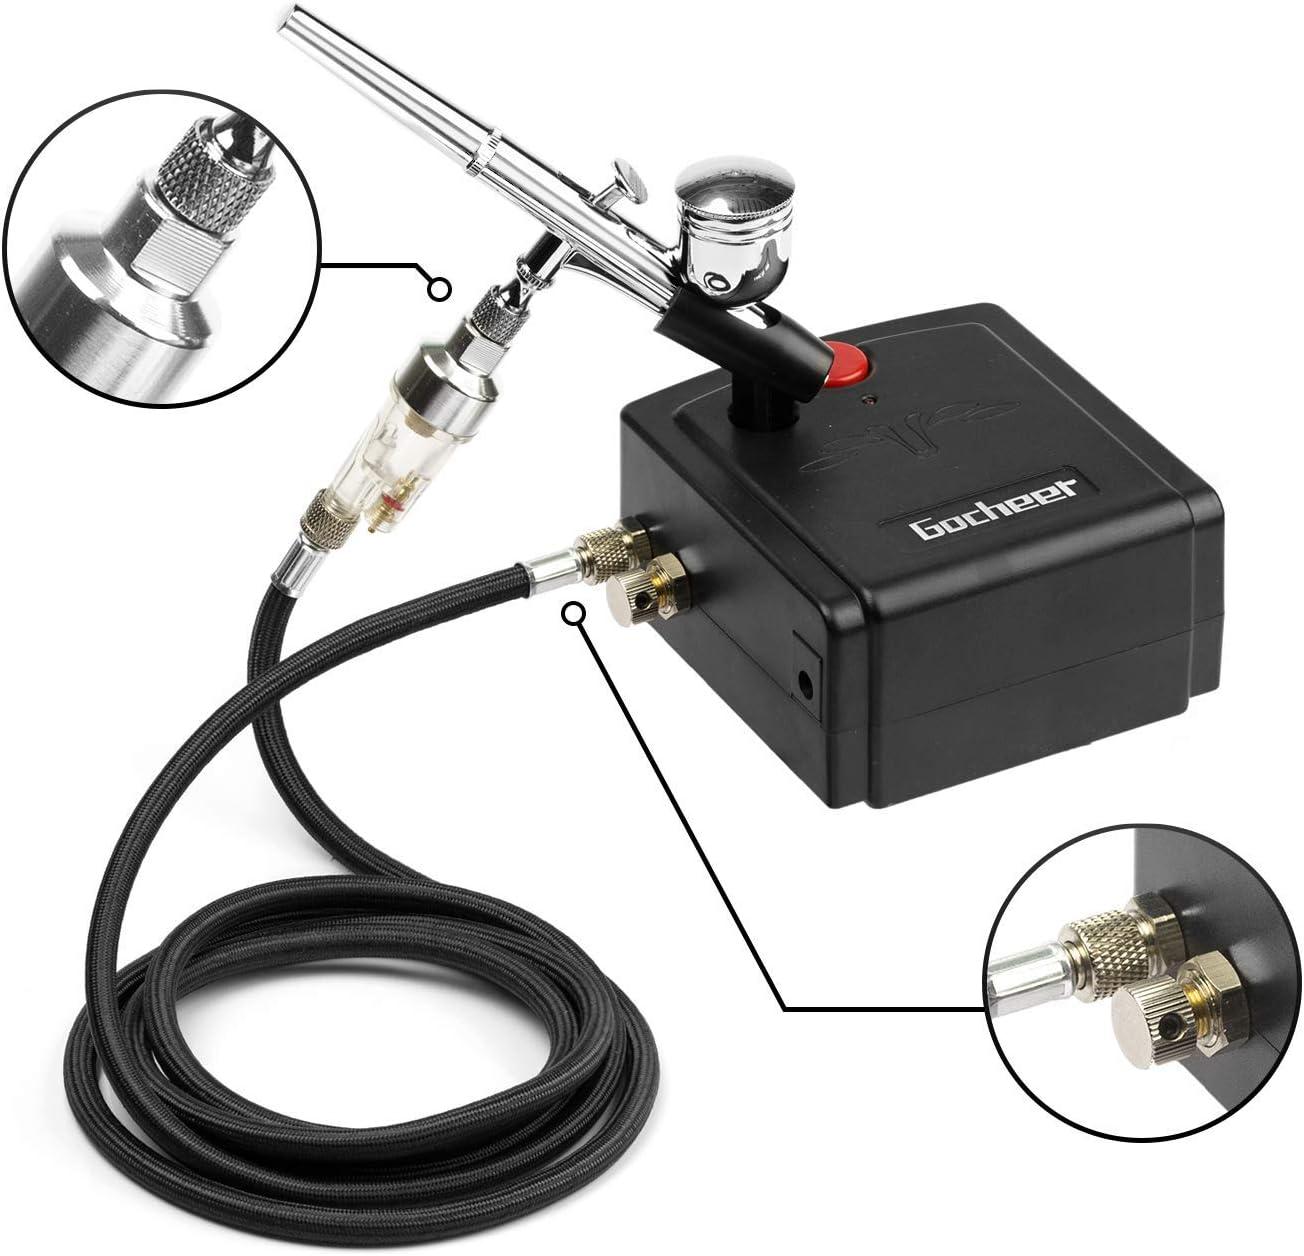 Gocheer Airbrush Kit with Compressor Dual Action Mini Air Brush Kit  Airbrush Gun Set for Painting with 0.2/0.3/0.5mm Needles for Arts Nails  Decor Cake Decor Makeup Model Coloring